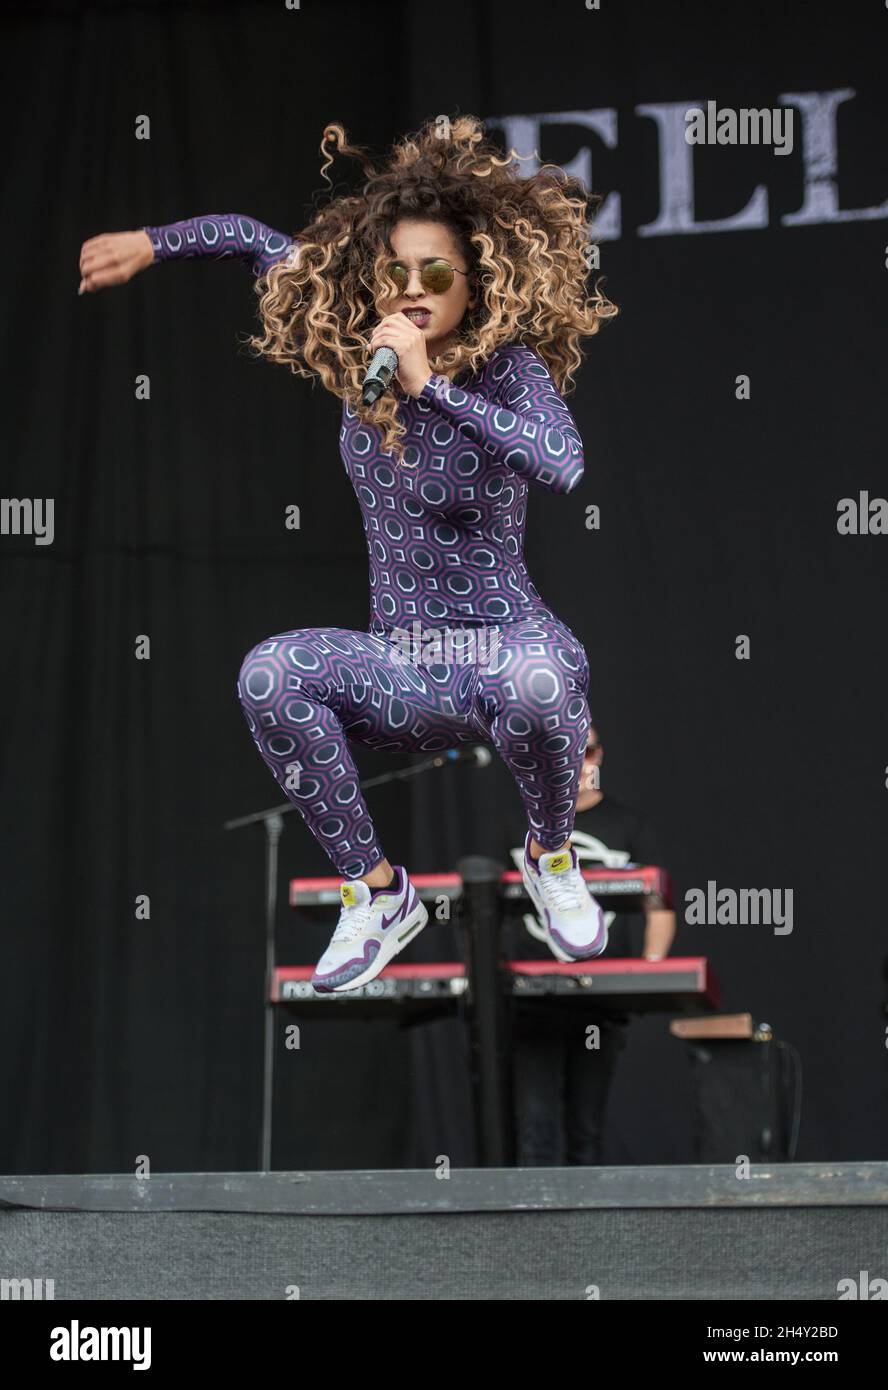 Ella Eyre performs live on stage on day 1 of V Festival on August 22 2015 at Weston Park, Staffordshire, UK Stock Photo